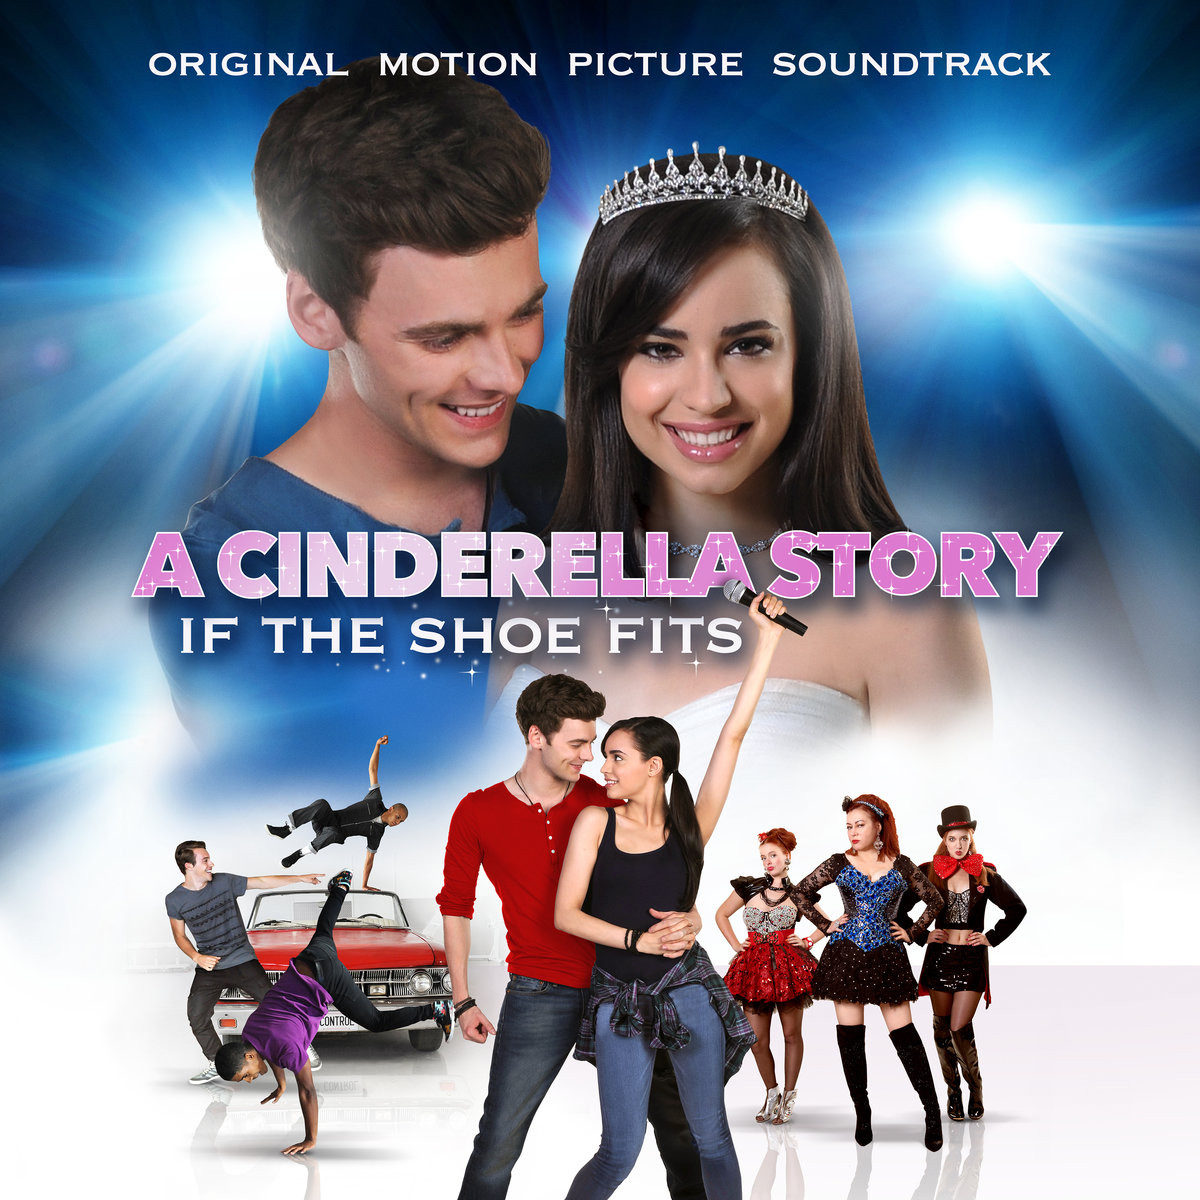 Cinderella Story 4 If The Shoe Fits Stream